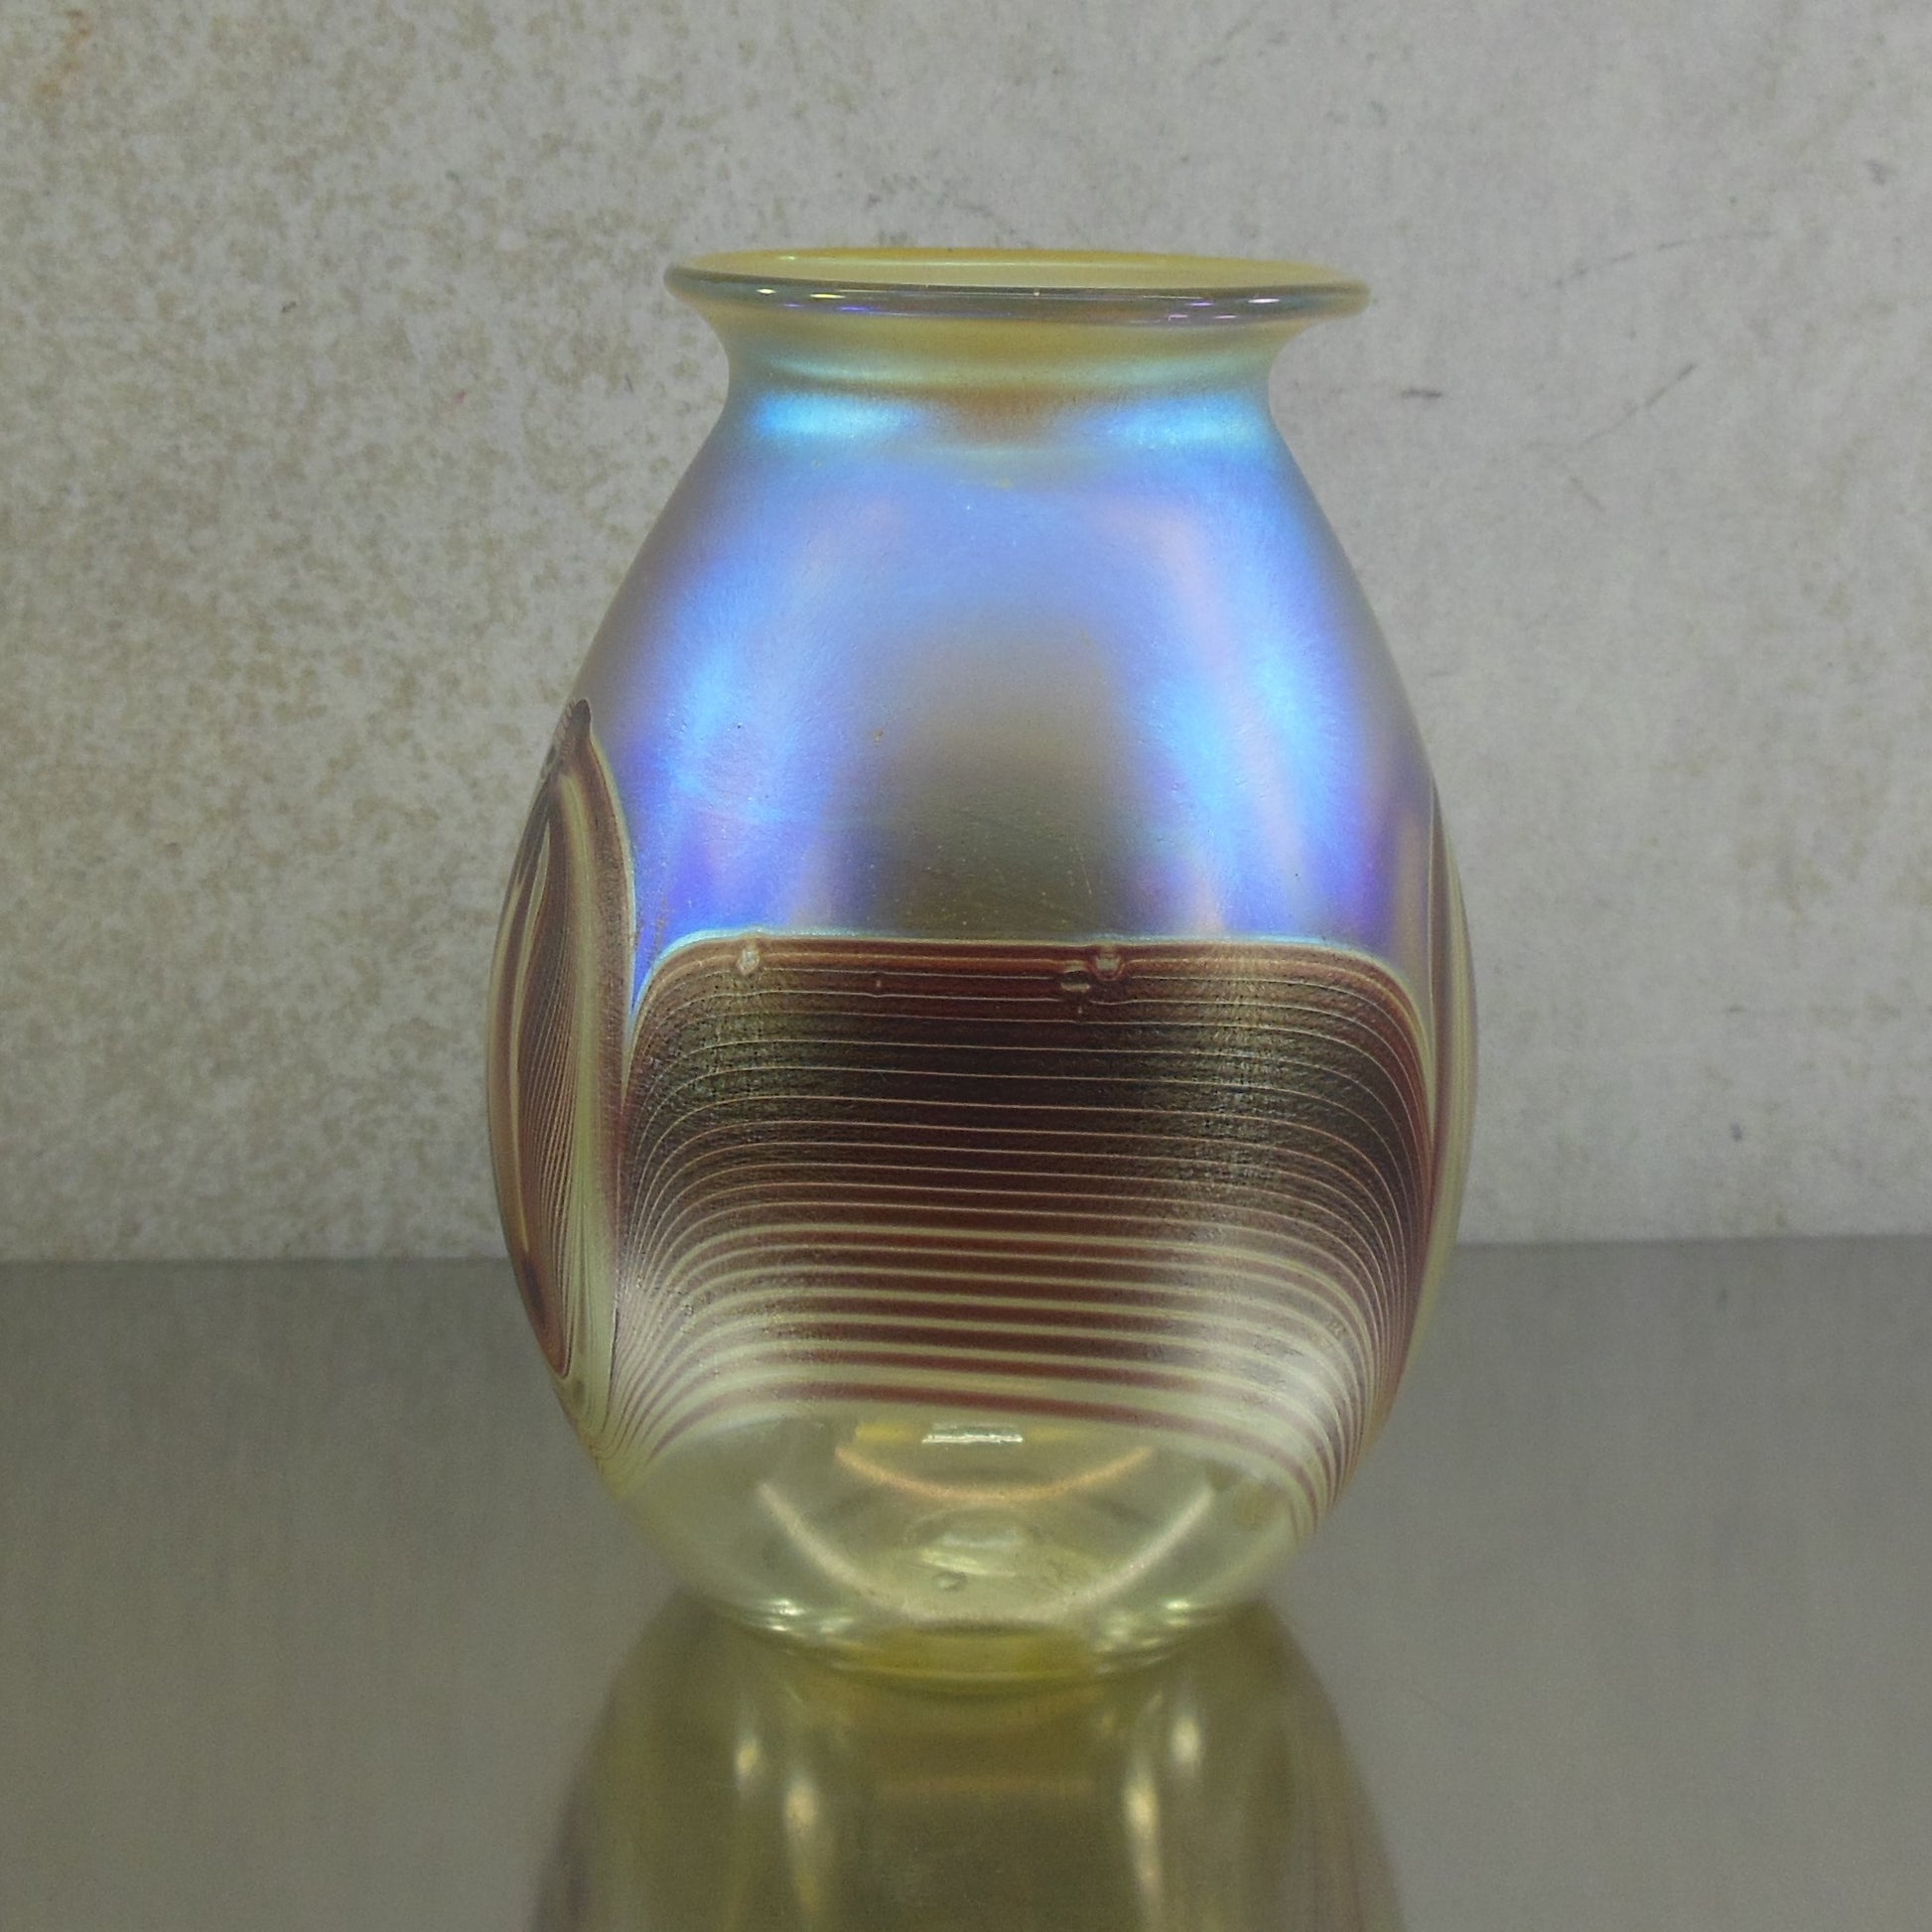 Josh Simpson 1979 Signed Iridescent Pulled Feather Vase 5" Brown Yellow